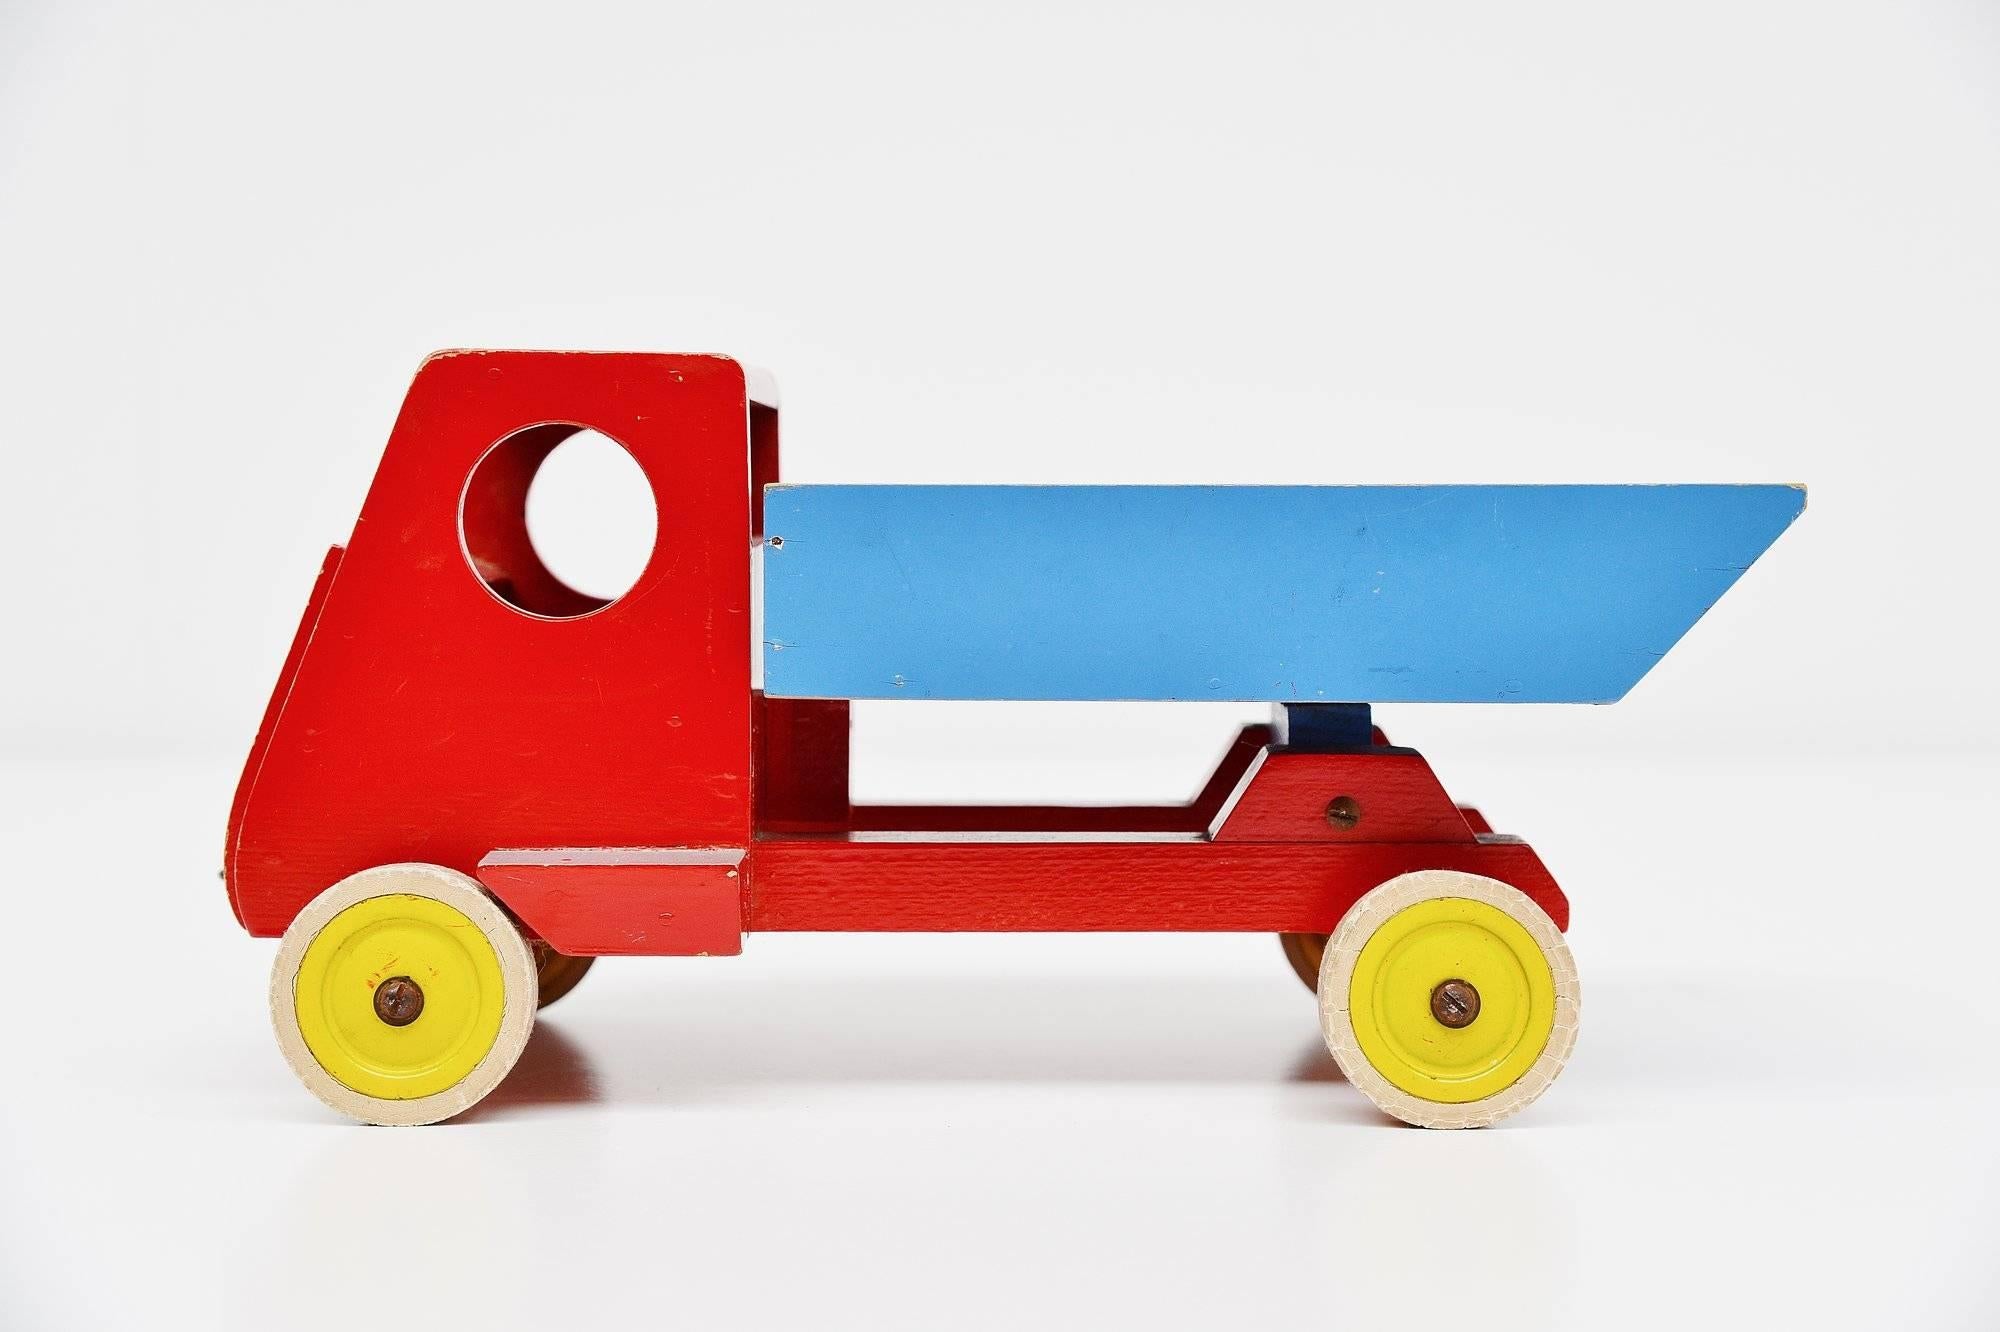 Very nice toy tilt truck designed by Ko Verzuu for Ado Holland in 1951. Ado means Arbeid door onvolwaardigen, translated; labor by incapacitated, which makes this an even more special piece. Toys by Ado are being highly collected at the moment, even